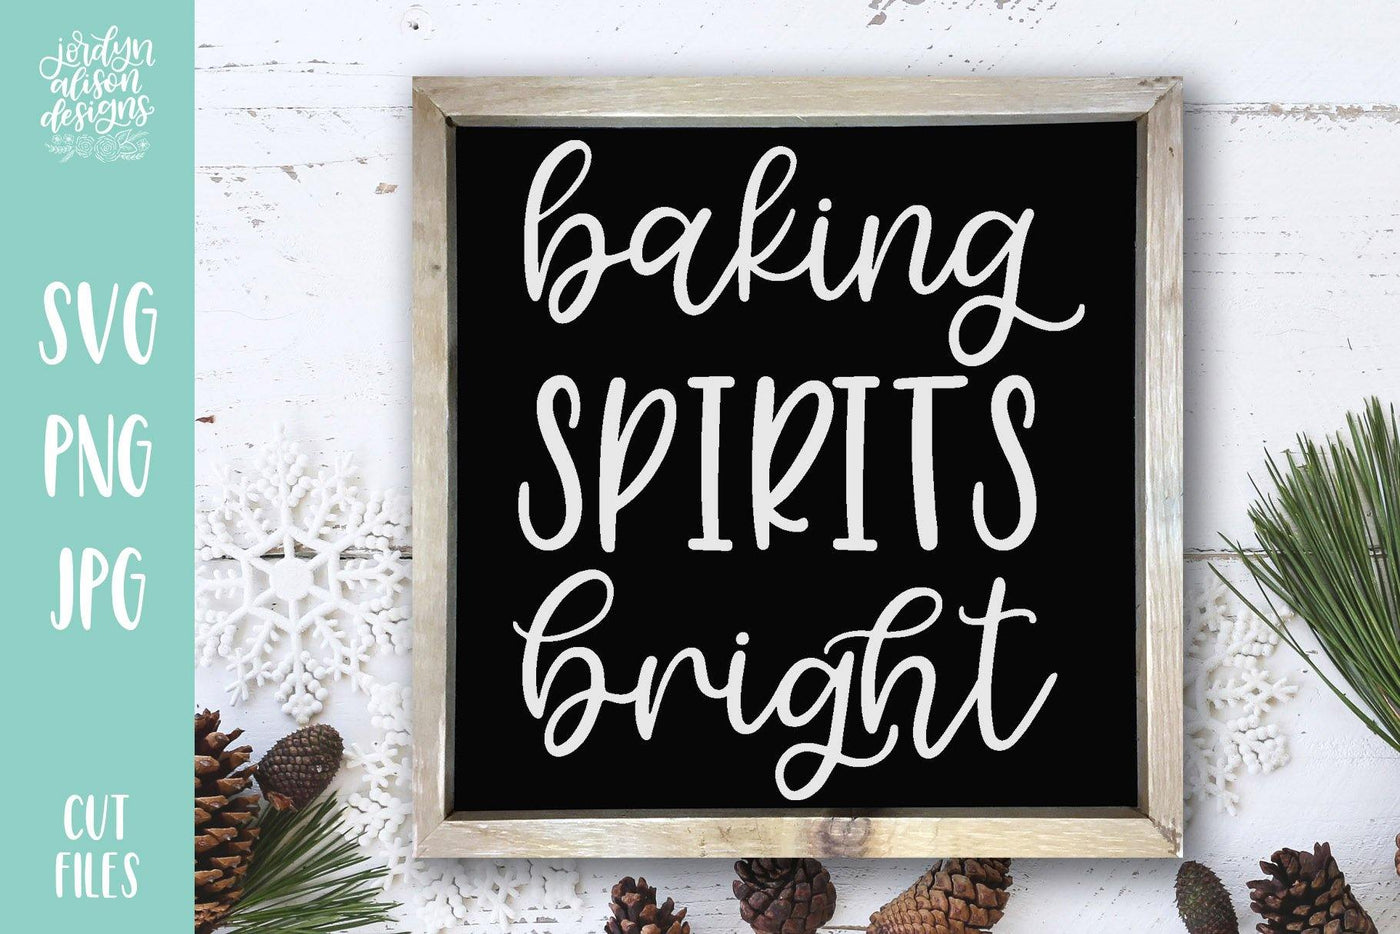 Square chalkboard frame with handwritten text "Baking Spirits Bright"